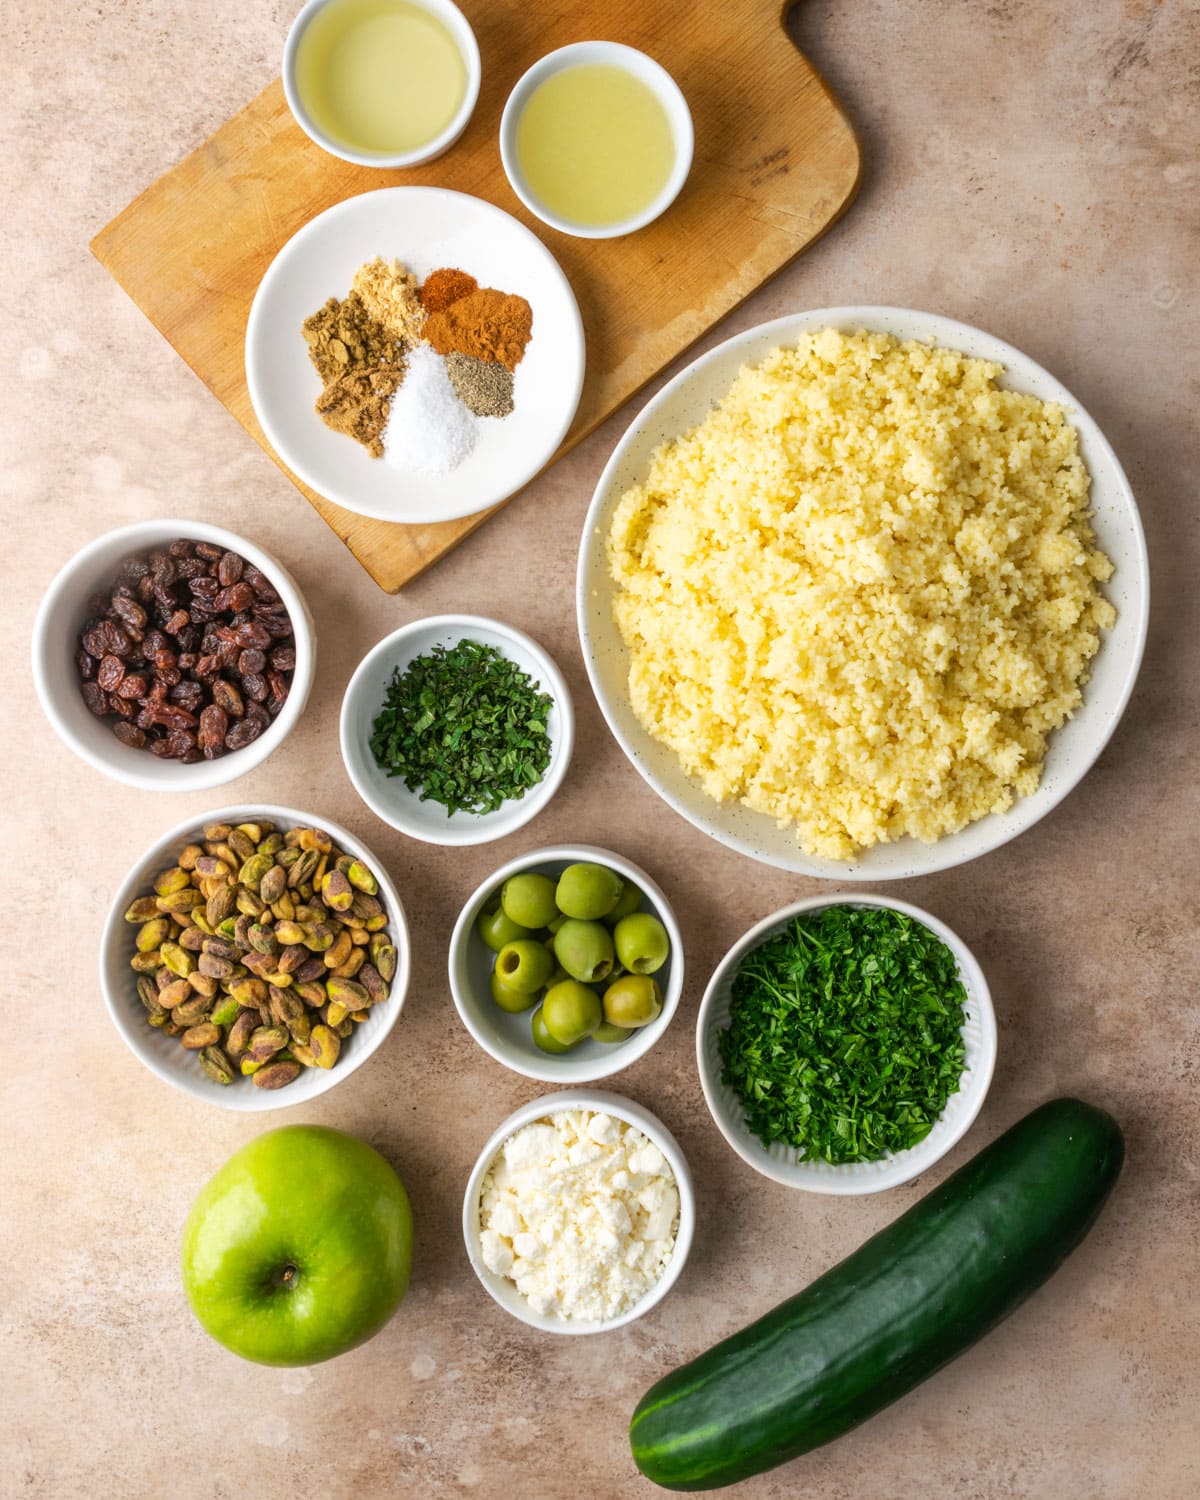 The ingredients for Mediterranean couscous salad.